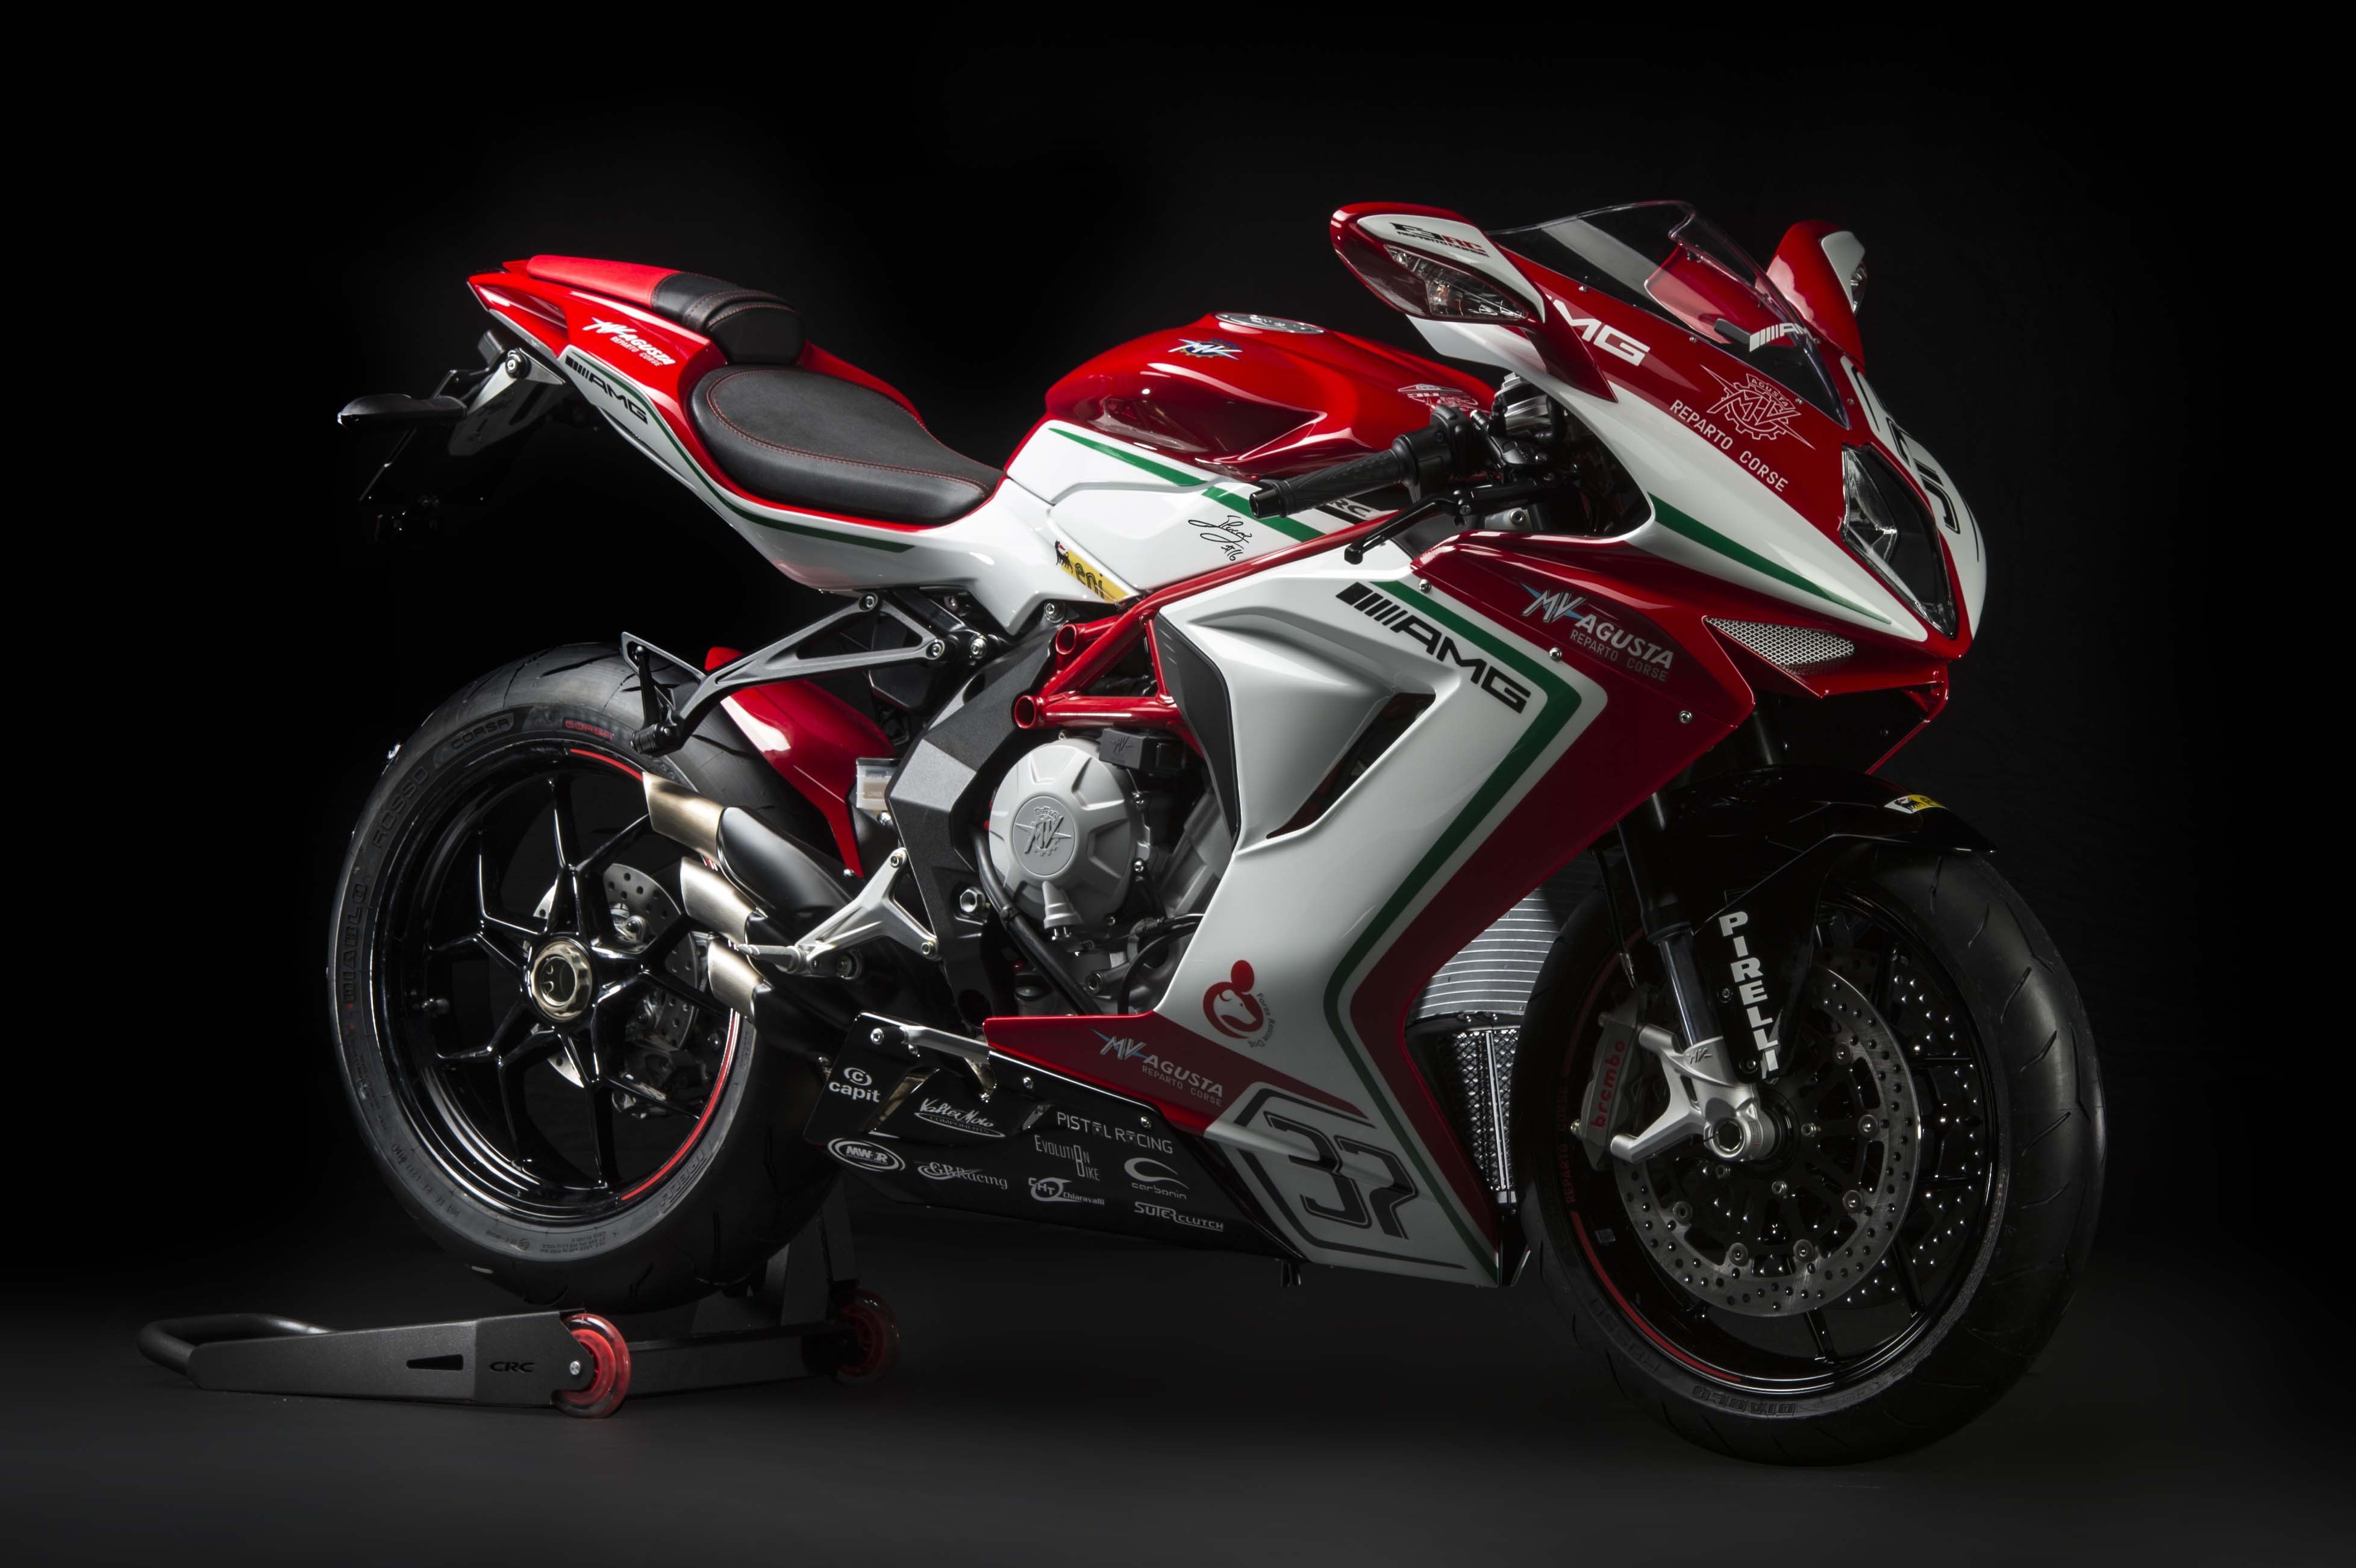 General 3911x2603 motorcycle MV agusta MV Agusta f3 800 Red Motorcycles black background vehicle simple background Italian motorcycles